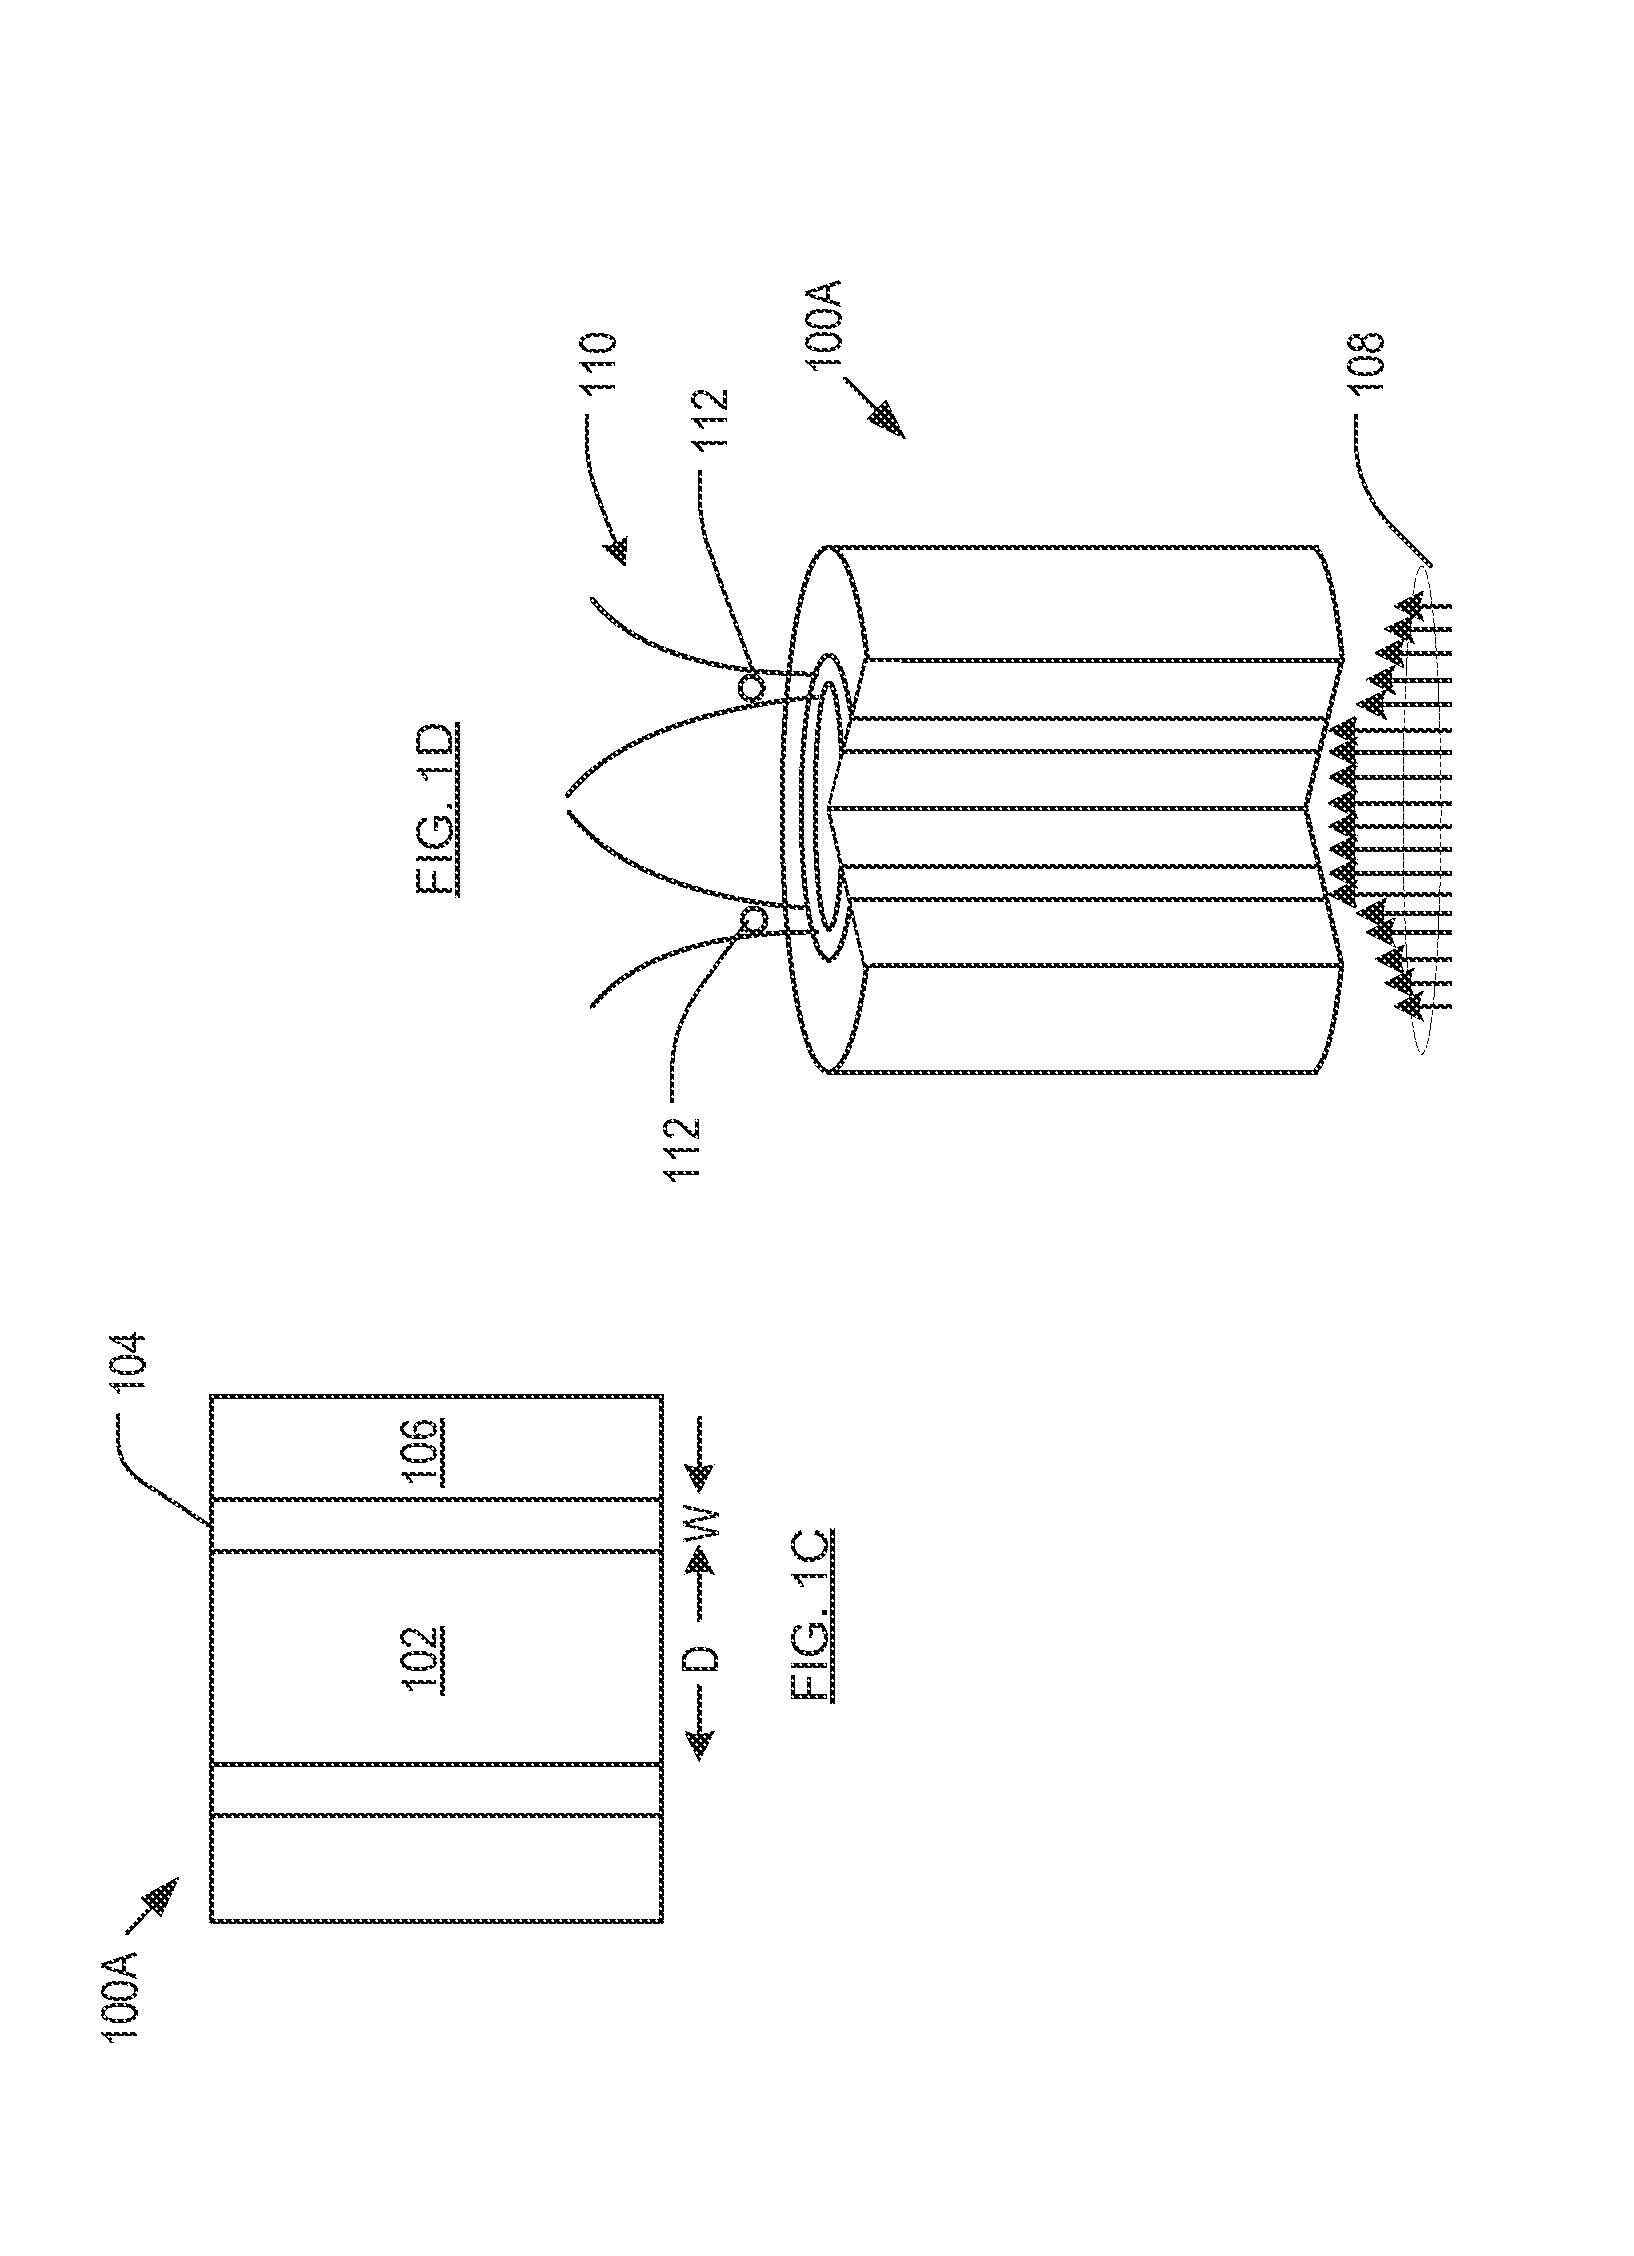 Method and structure for plasmonic optical trapping of nano-scale particles